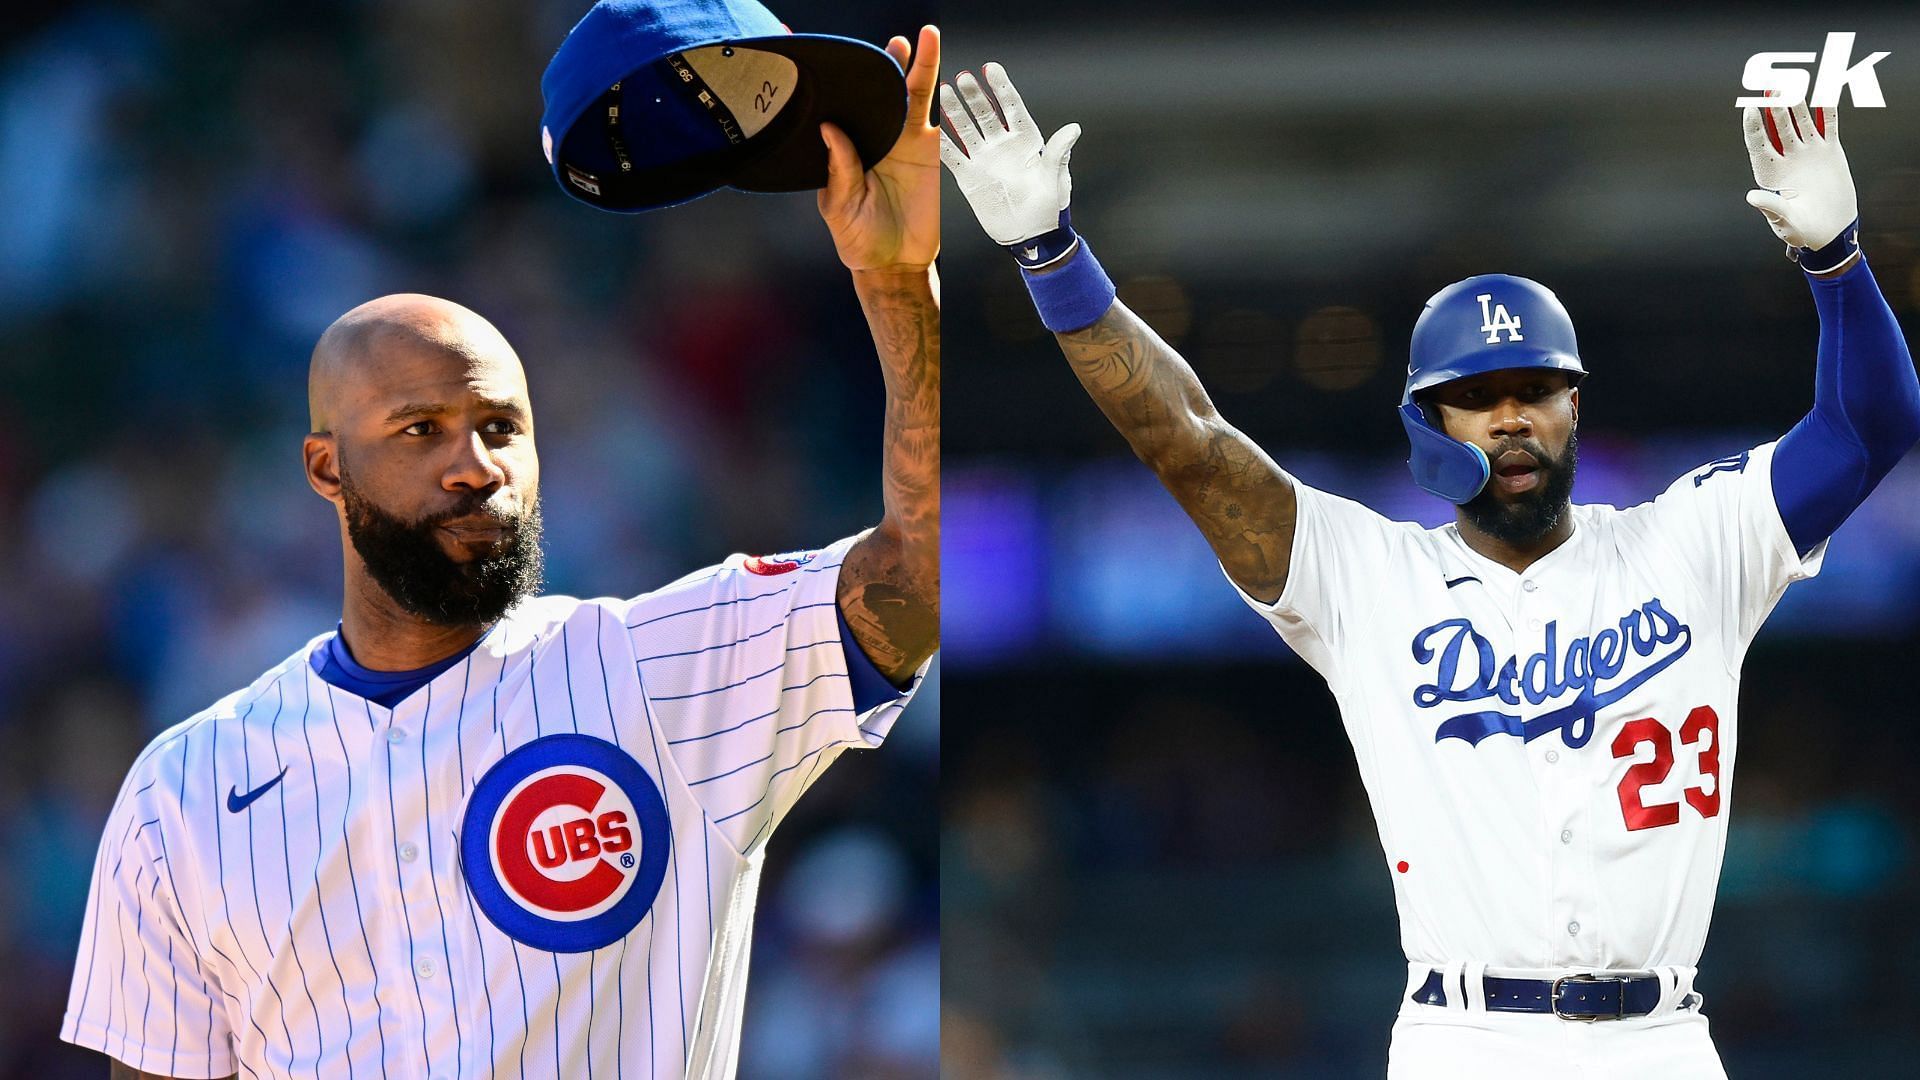 Dodgers outfielder Jason Heyward still feels pride for winning the 2016 World Series with the Cubs